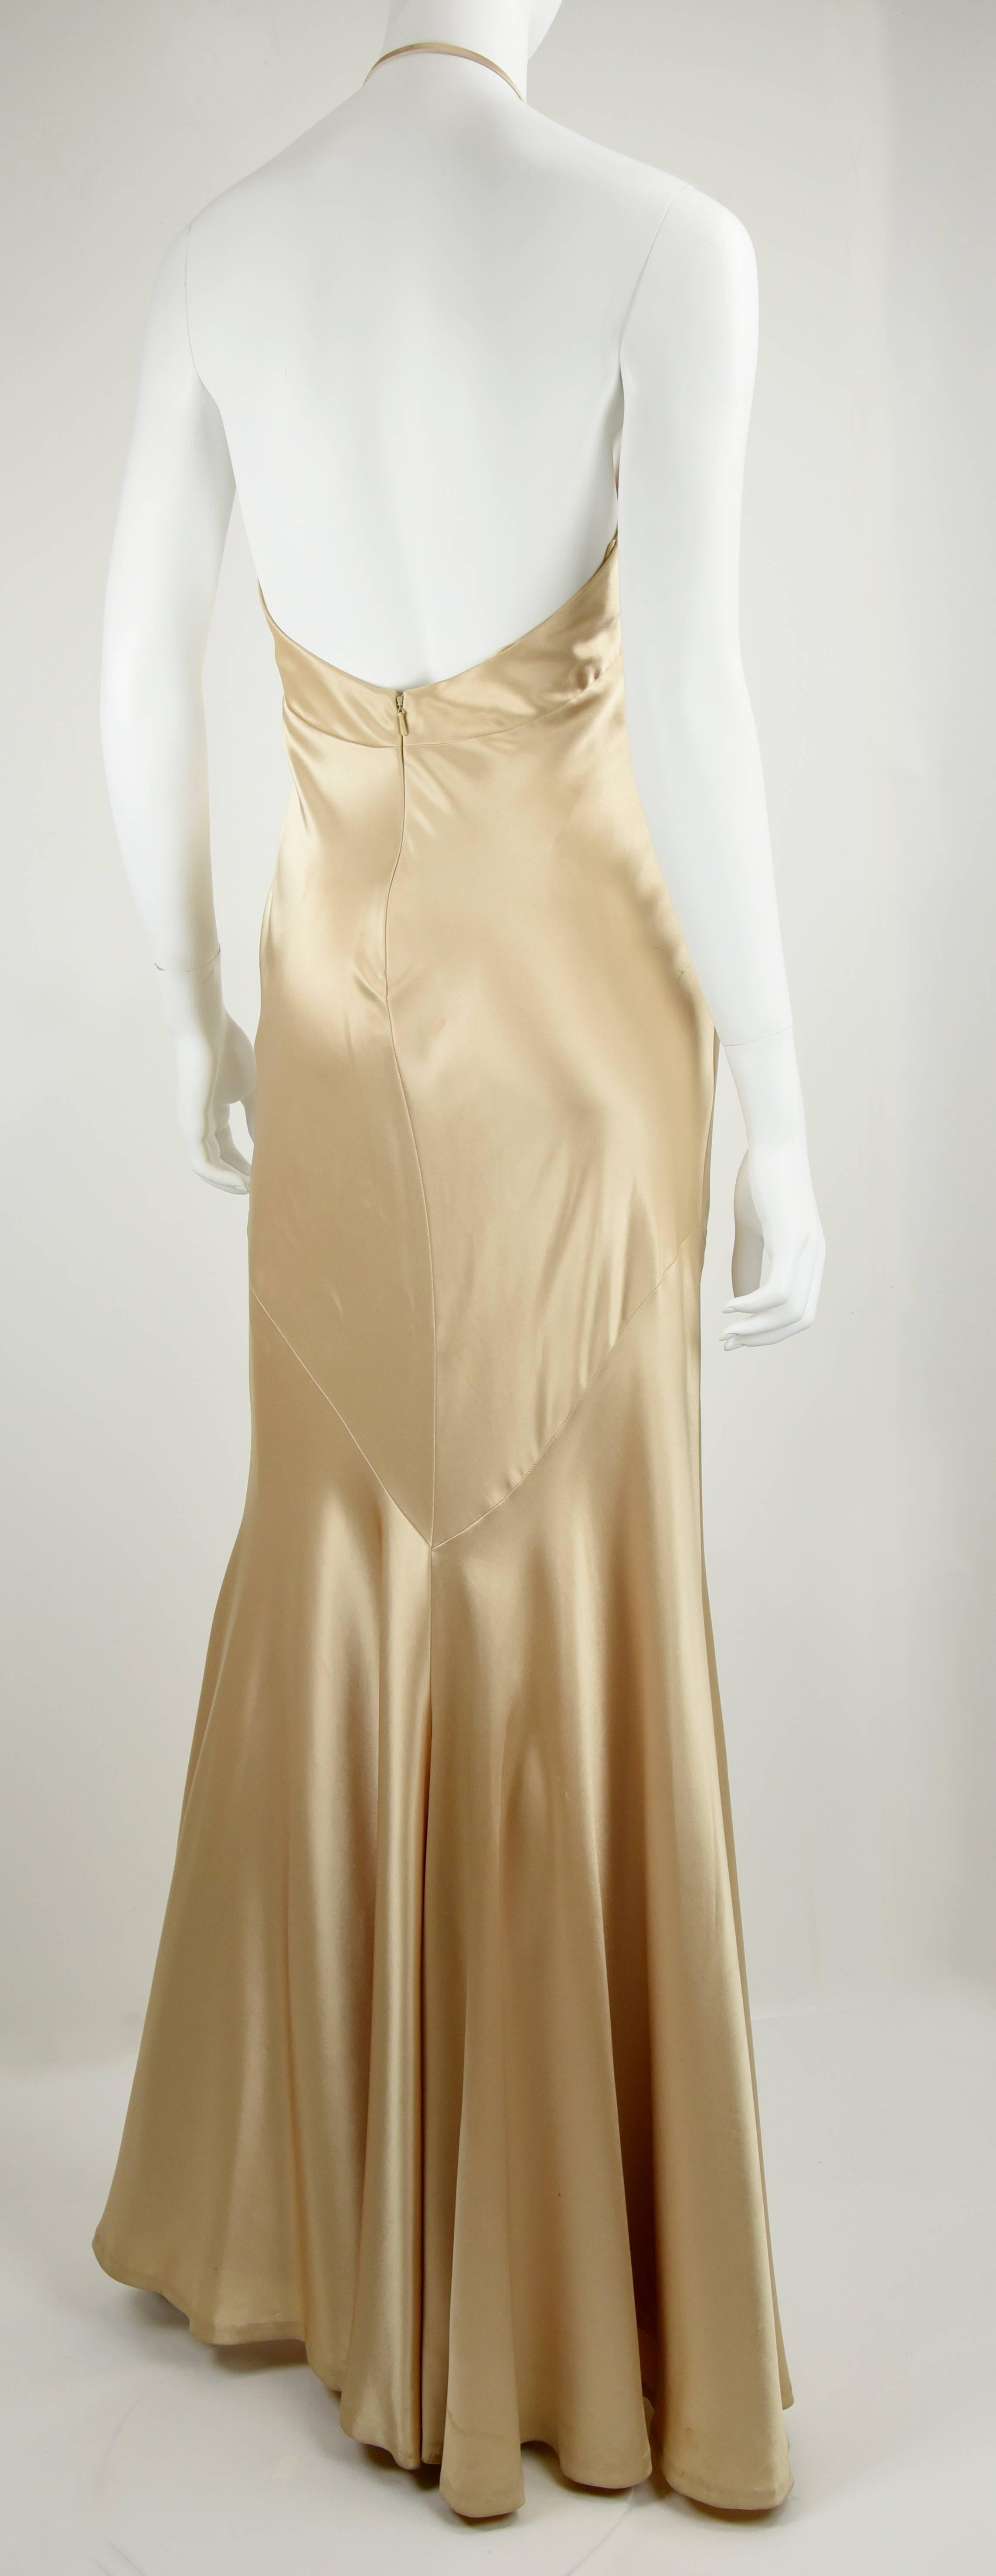 1990s Carmen Marc Valvo Champagne Satin Jean Harlow Gown Size 6 In Good Condition For Sale In Portland, OR